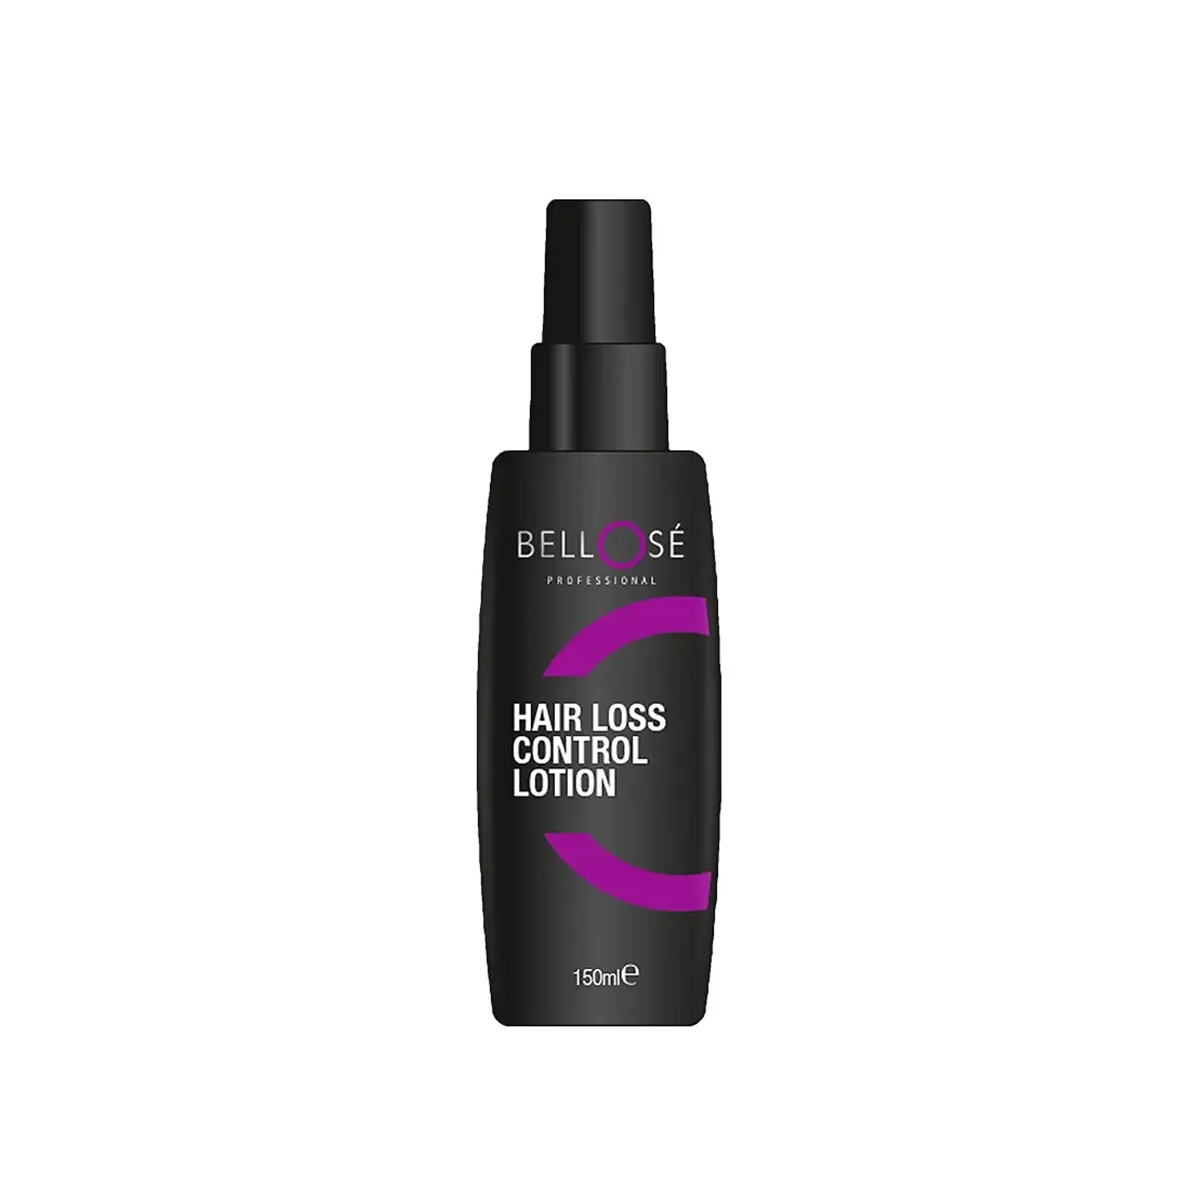 First product image of Bellose Hair Loss Control Lotion 150ml